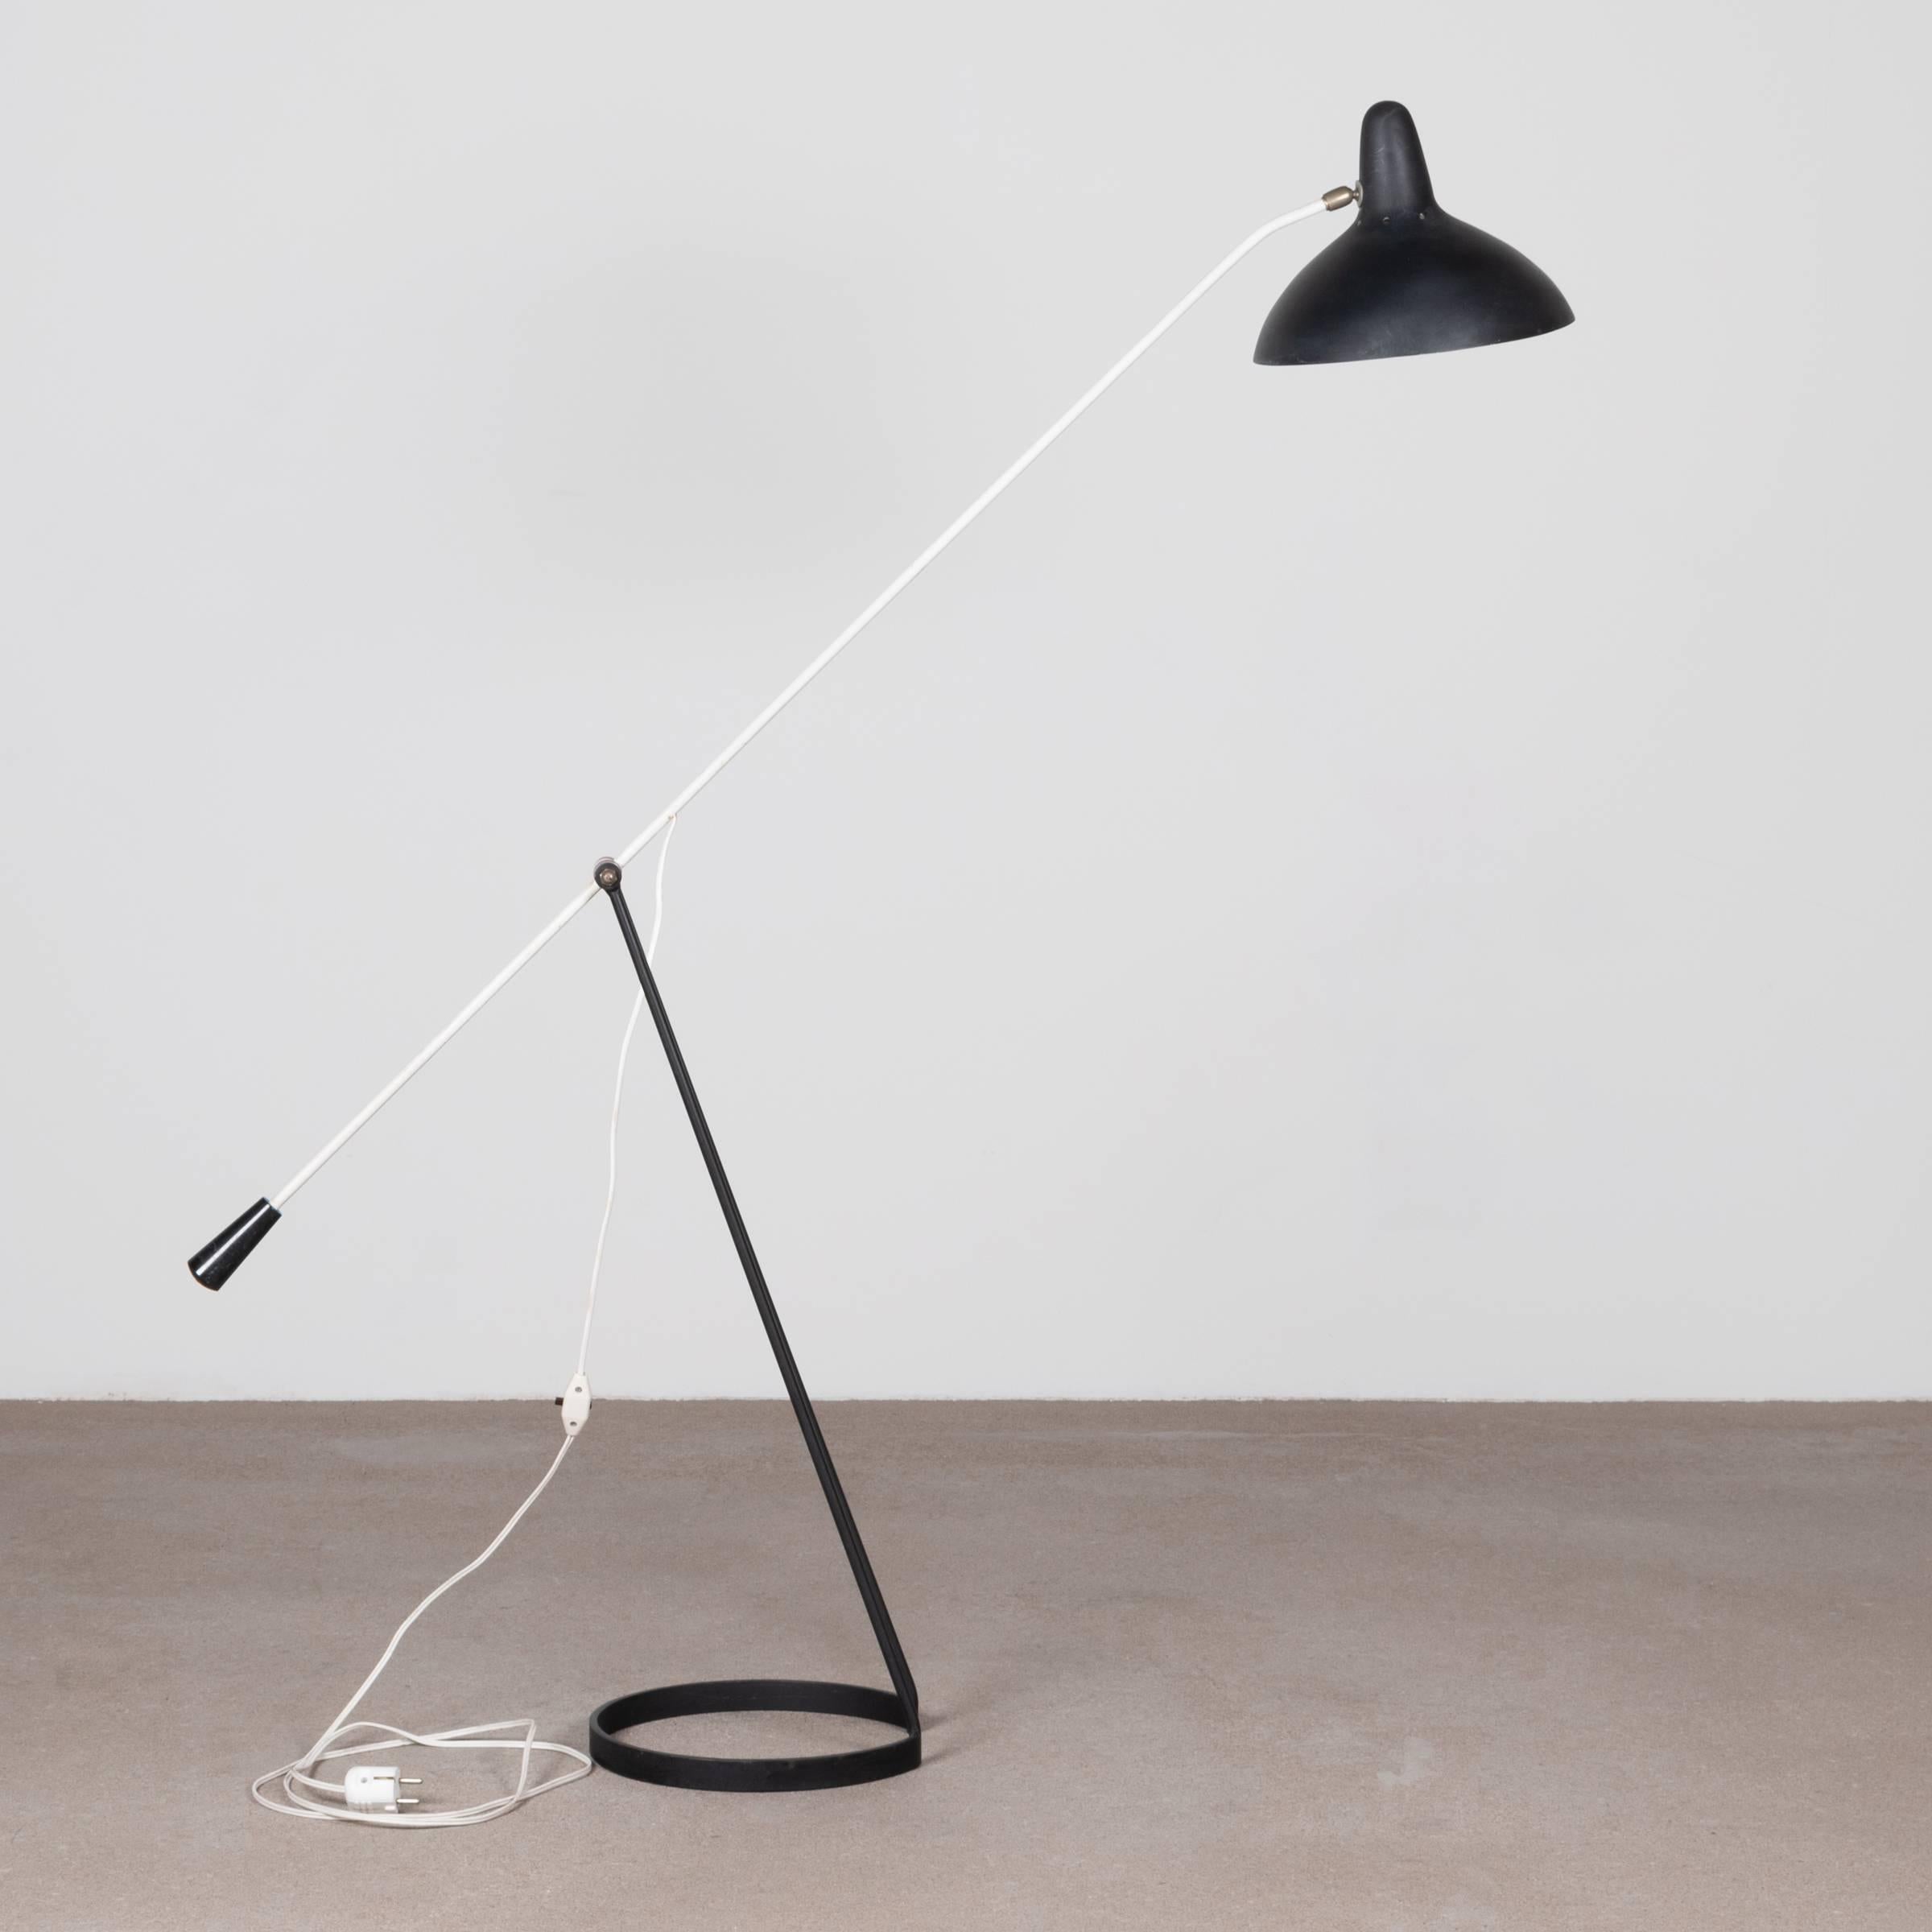 Rare and collectable elegant floor lamp by Floris Fiedeldij for Artimeta (Netherlands). Black and white enameled steel base with pendulum arm and brass details. Very good original working condition with beautiful patina.